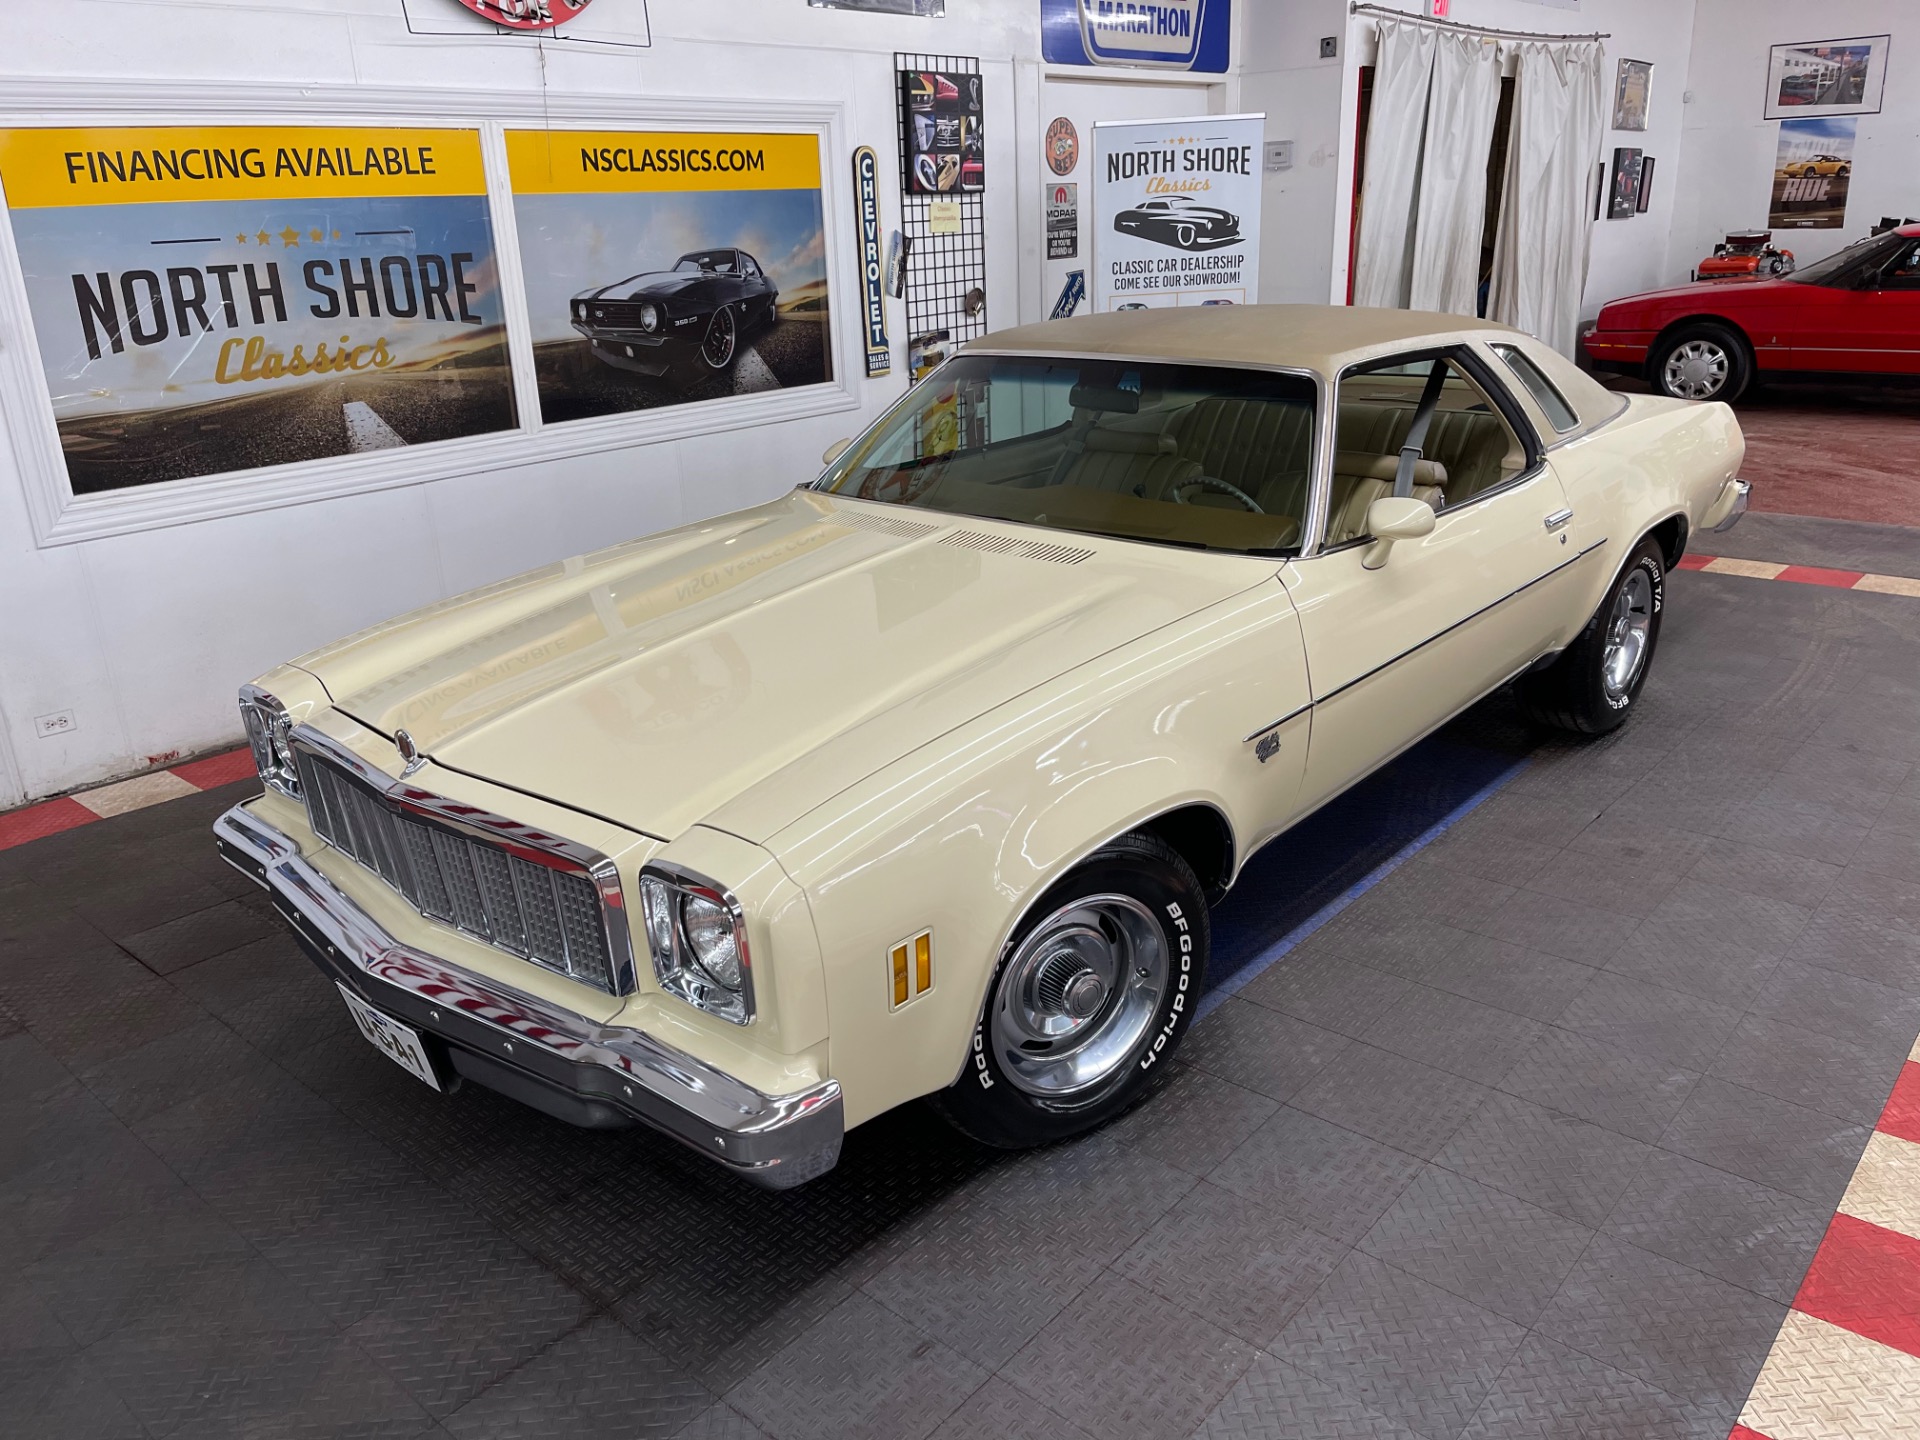 Used 1975 Chevrolet Malibu - CLASSIC COUPE - VERY CLEAN - SEE VIDEO For Sale  (Sold) | North Shore Classics Stock #75853NSC